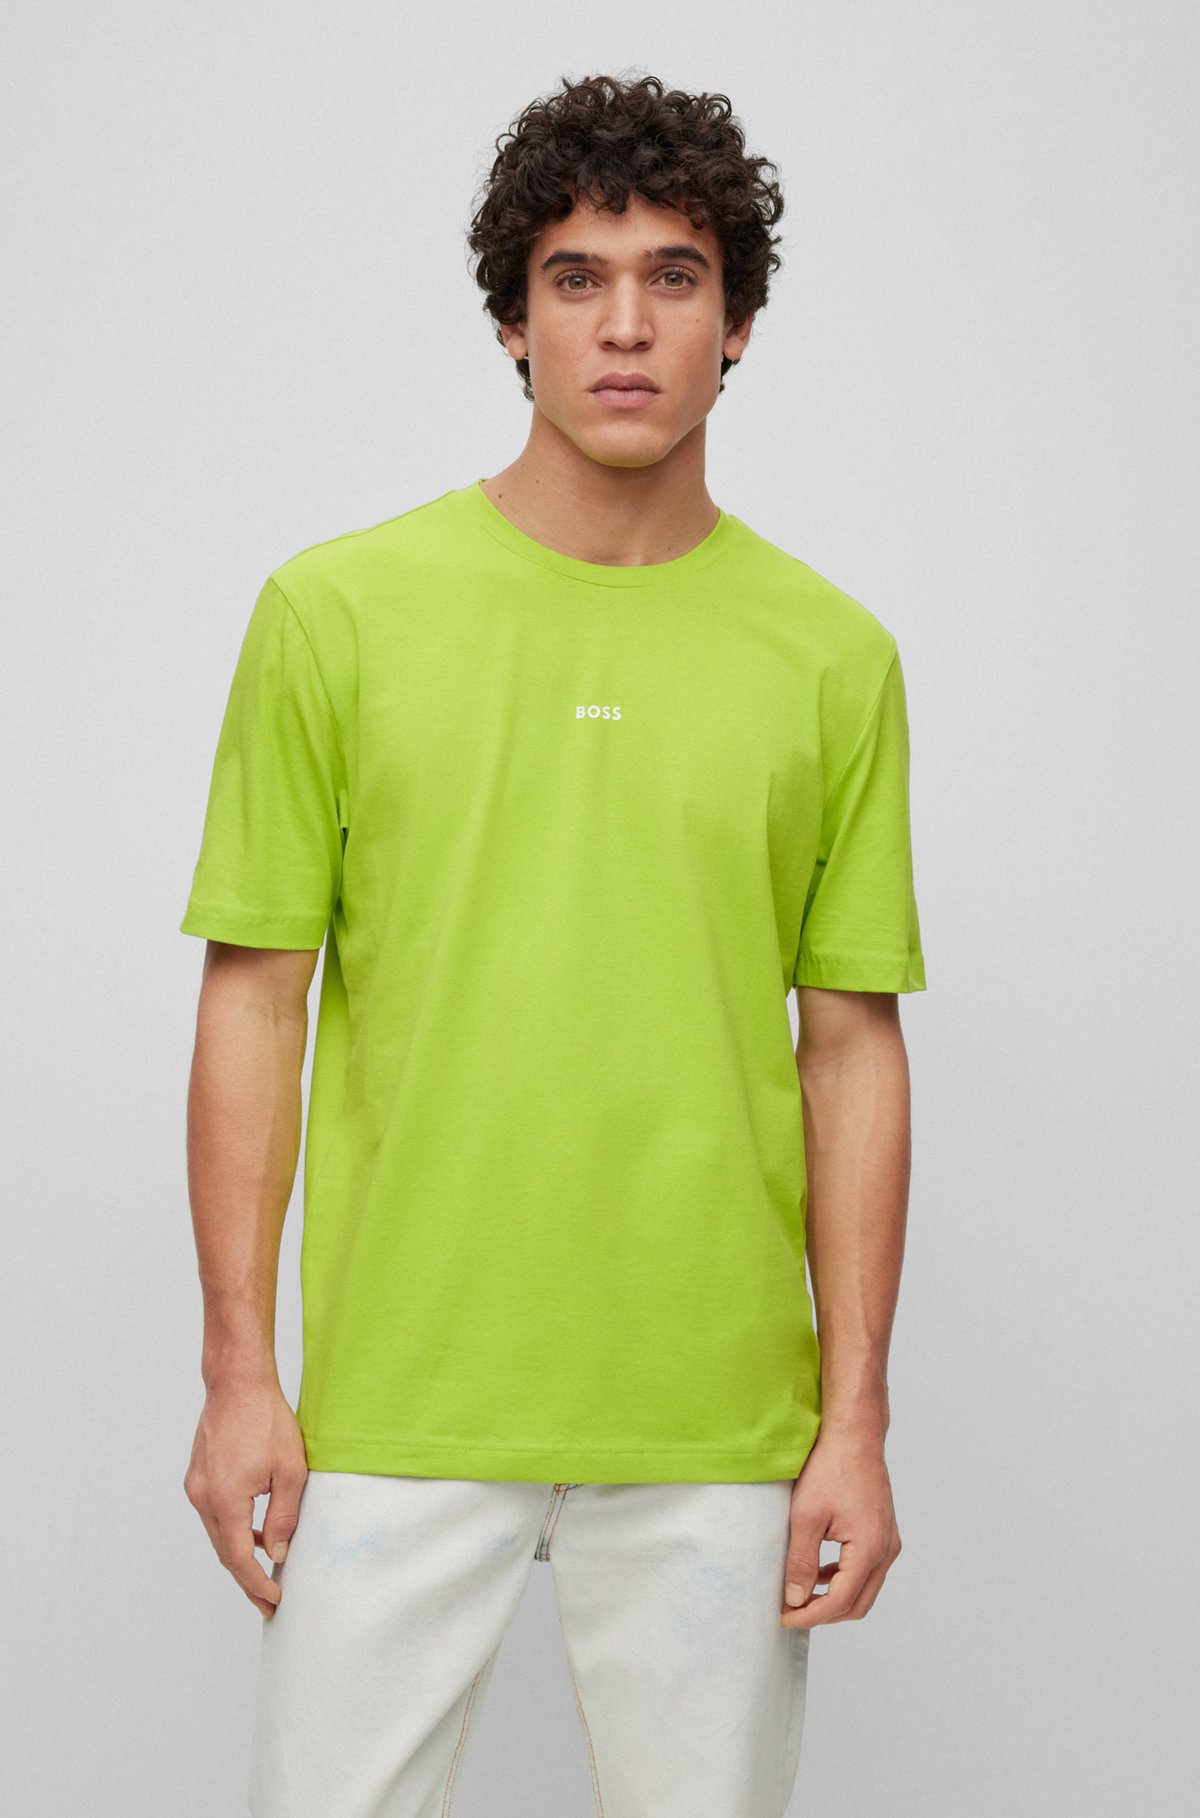 Relaxed-fit T-shirt in stretch cotton with logo print, Green